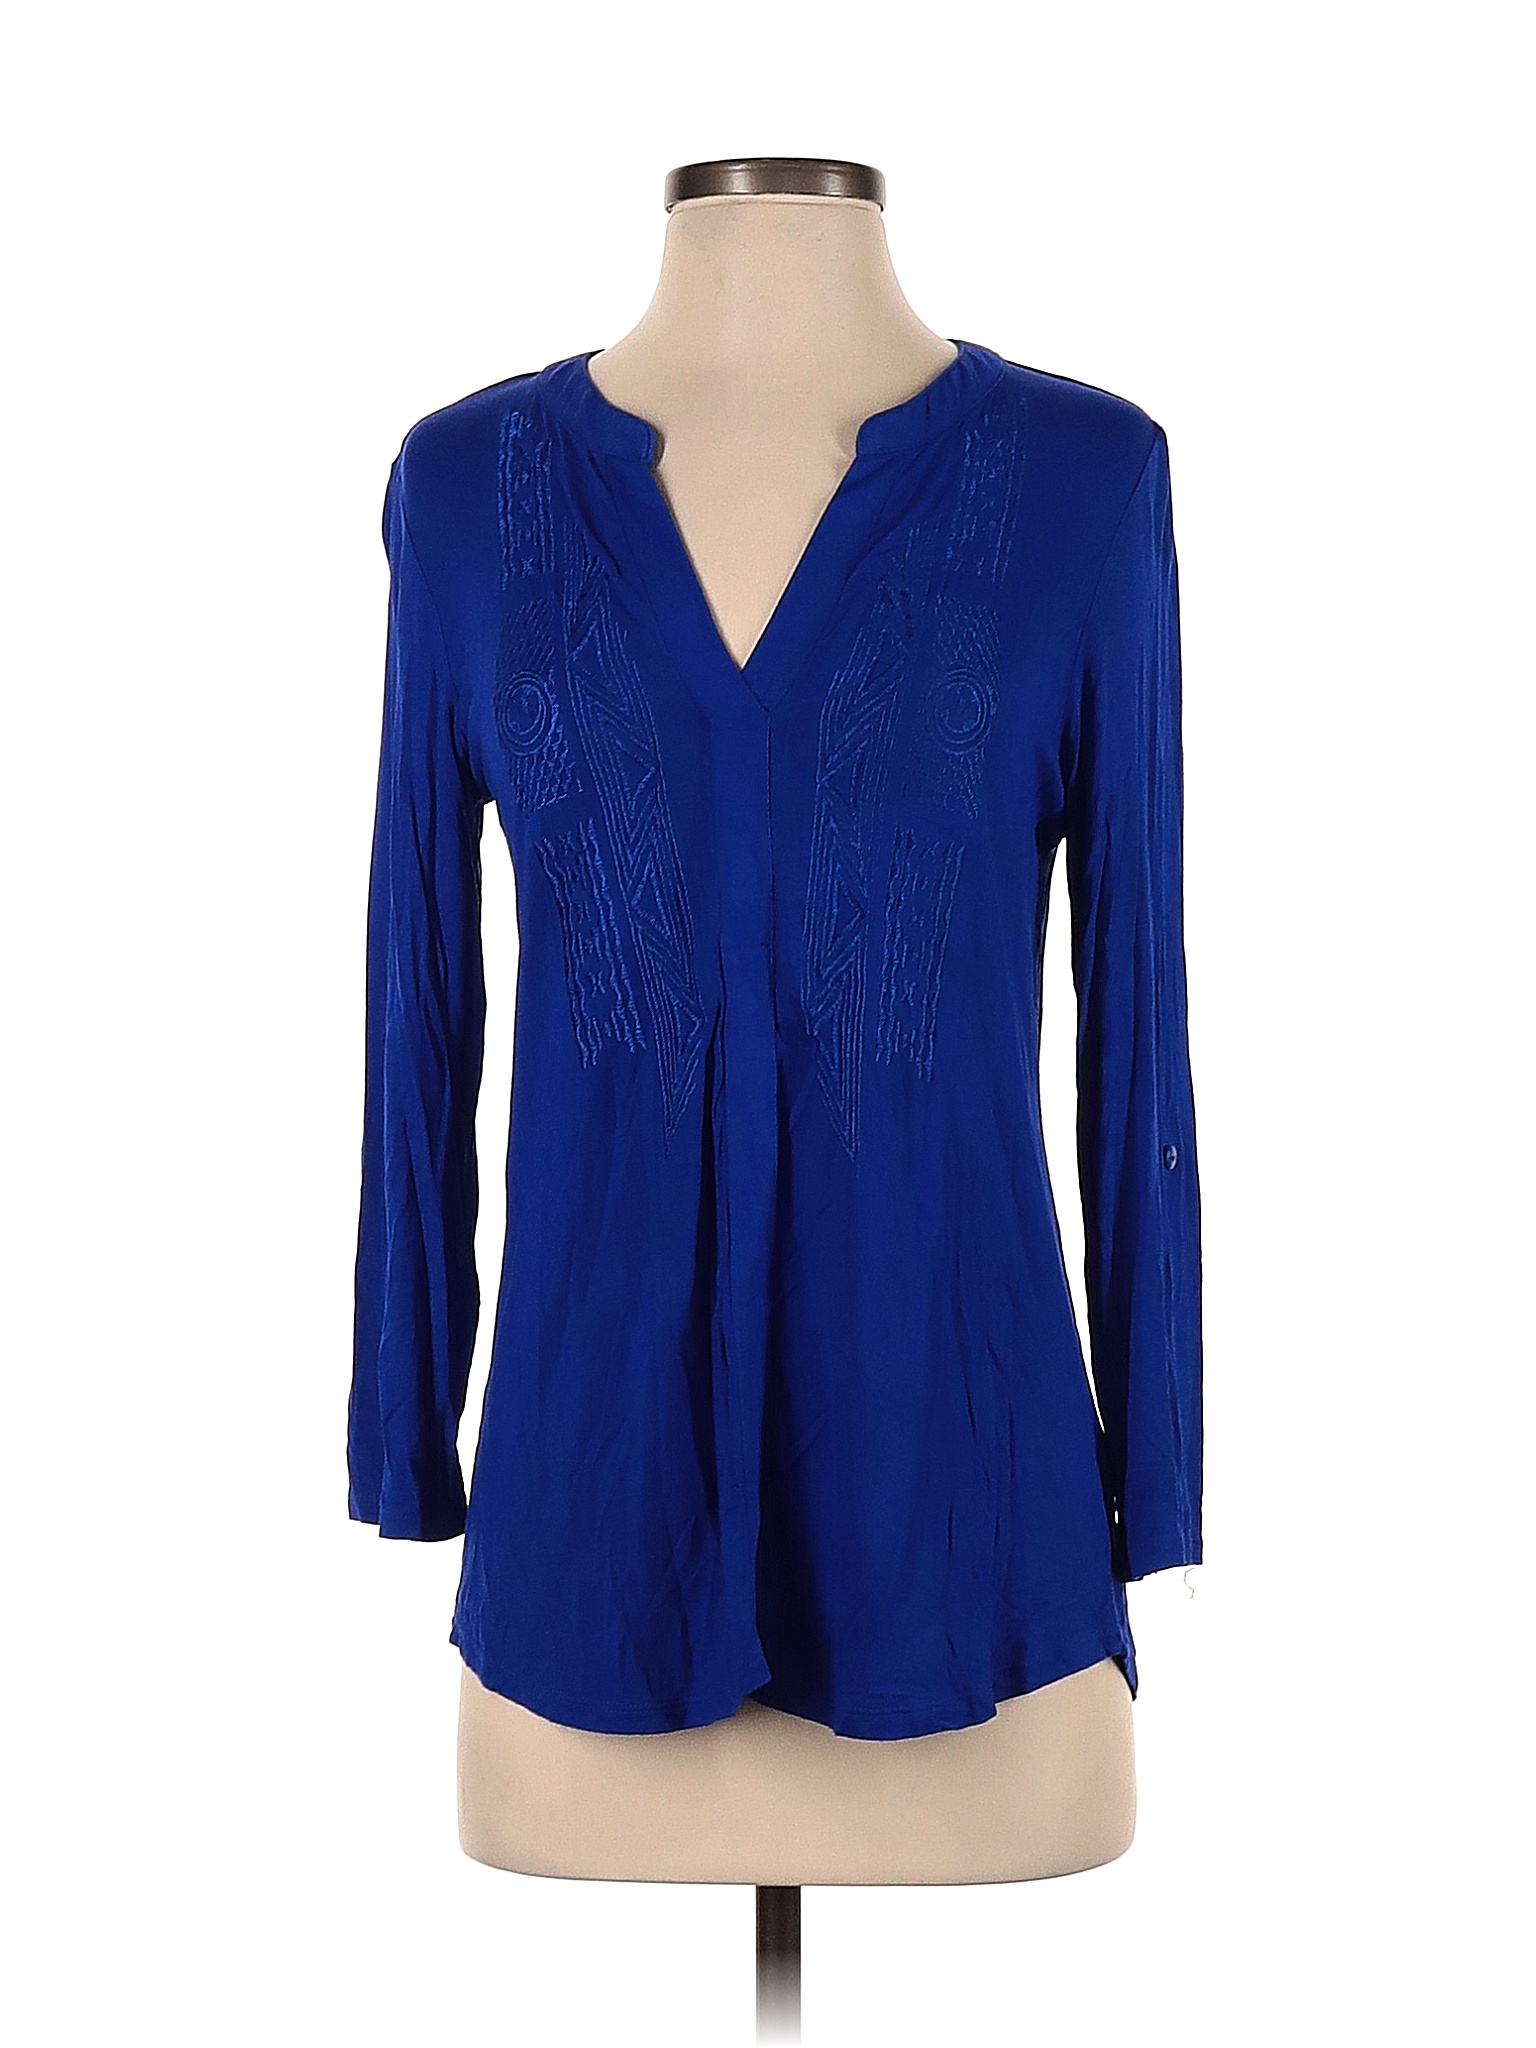 Cable & Gauge Solid Blue Long Sleeve Top Size S - 48% off | thredUP